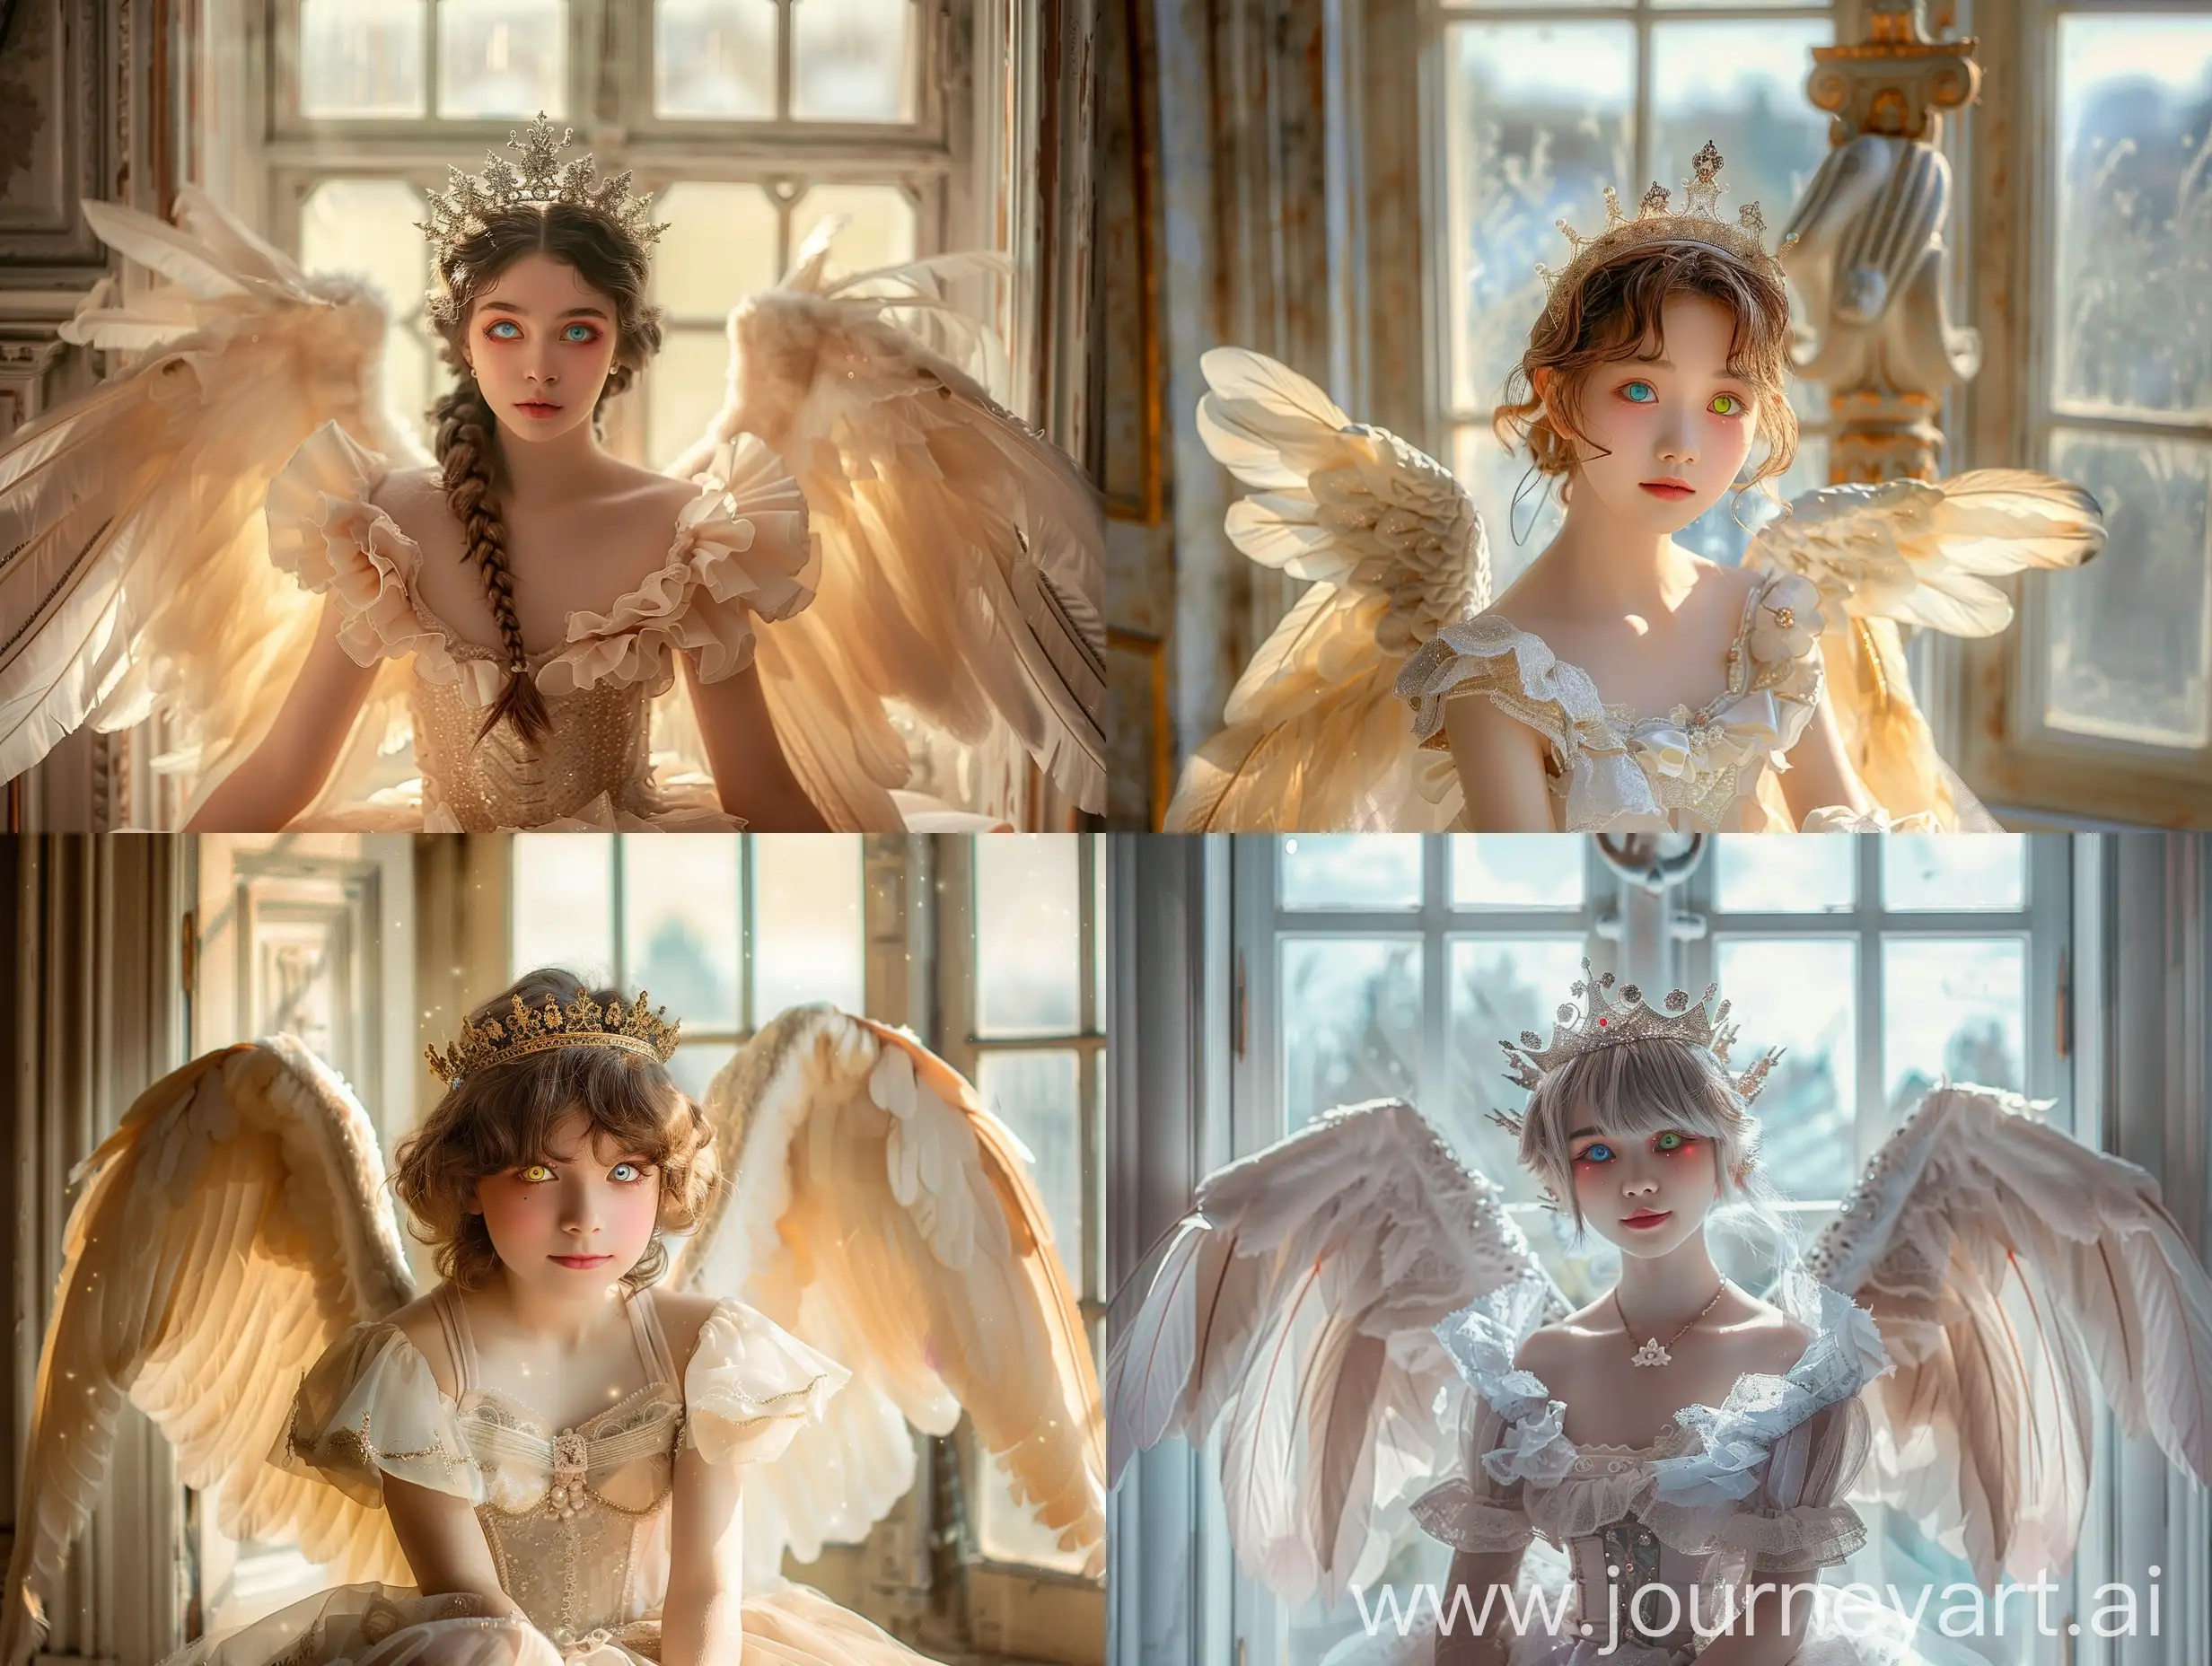 (super real photo of a very beautiful and charming young angel), (with colored eyes, and magnificent and beautiful wings), Instagram model, (wearing a very beautiful and princess dress), (sitting in front of the big window and beautiful, in the royal palace), there is a beautiful crown on the girl's head, a suitable pose, a smile, (her wings are open and slightly blocking the light of the window), delicate and beautiful wings, a masterpiece of photography, real, full of details,